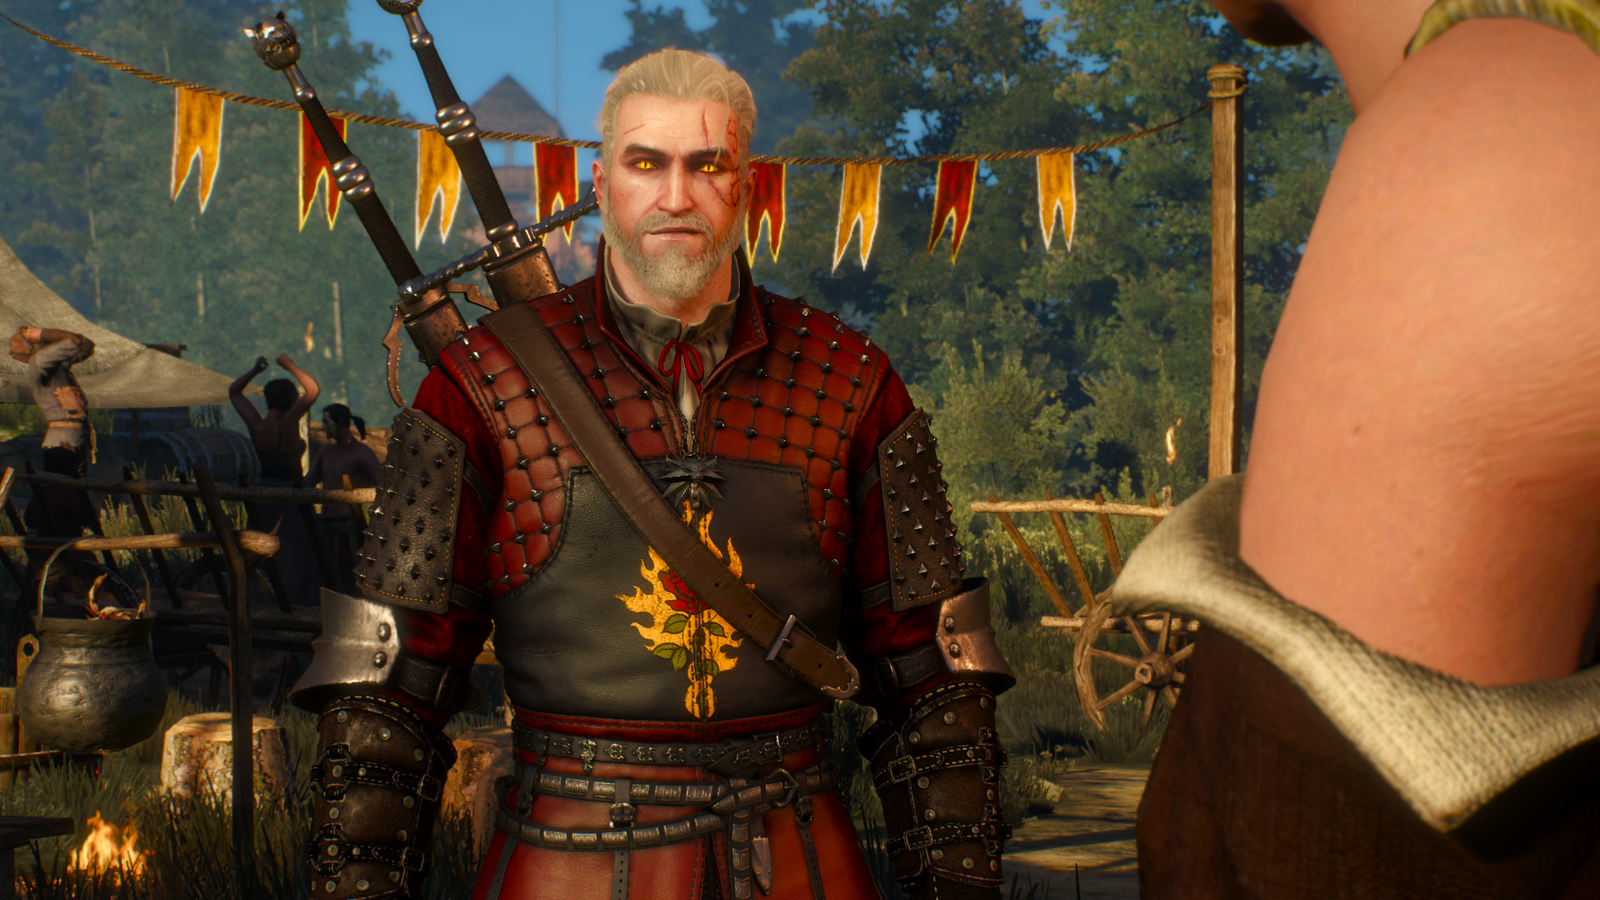 The witcher 3 witcher armor sets фото 72